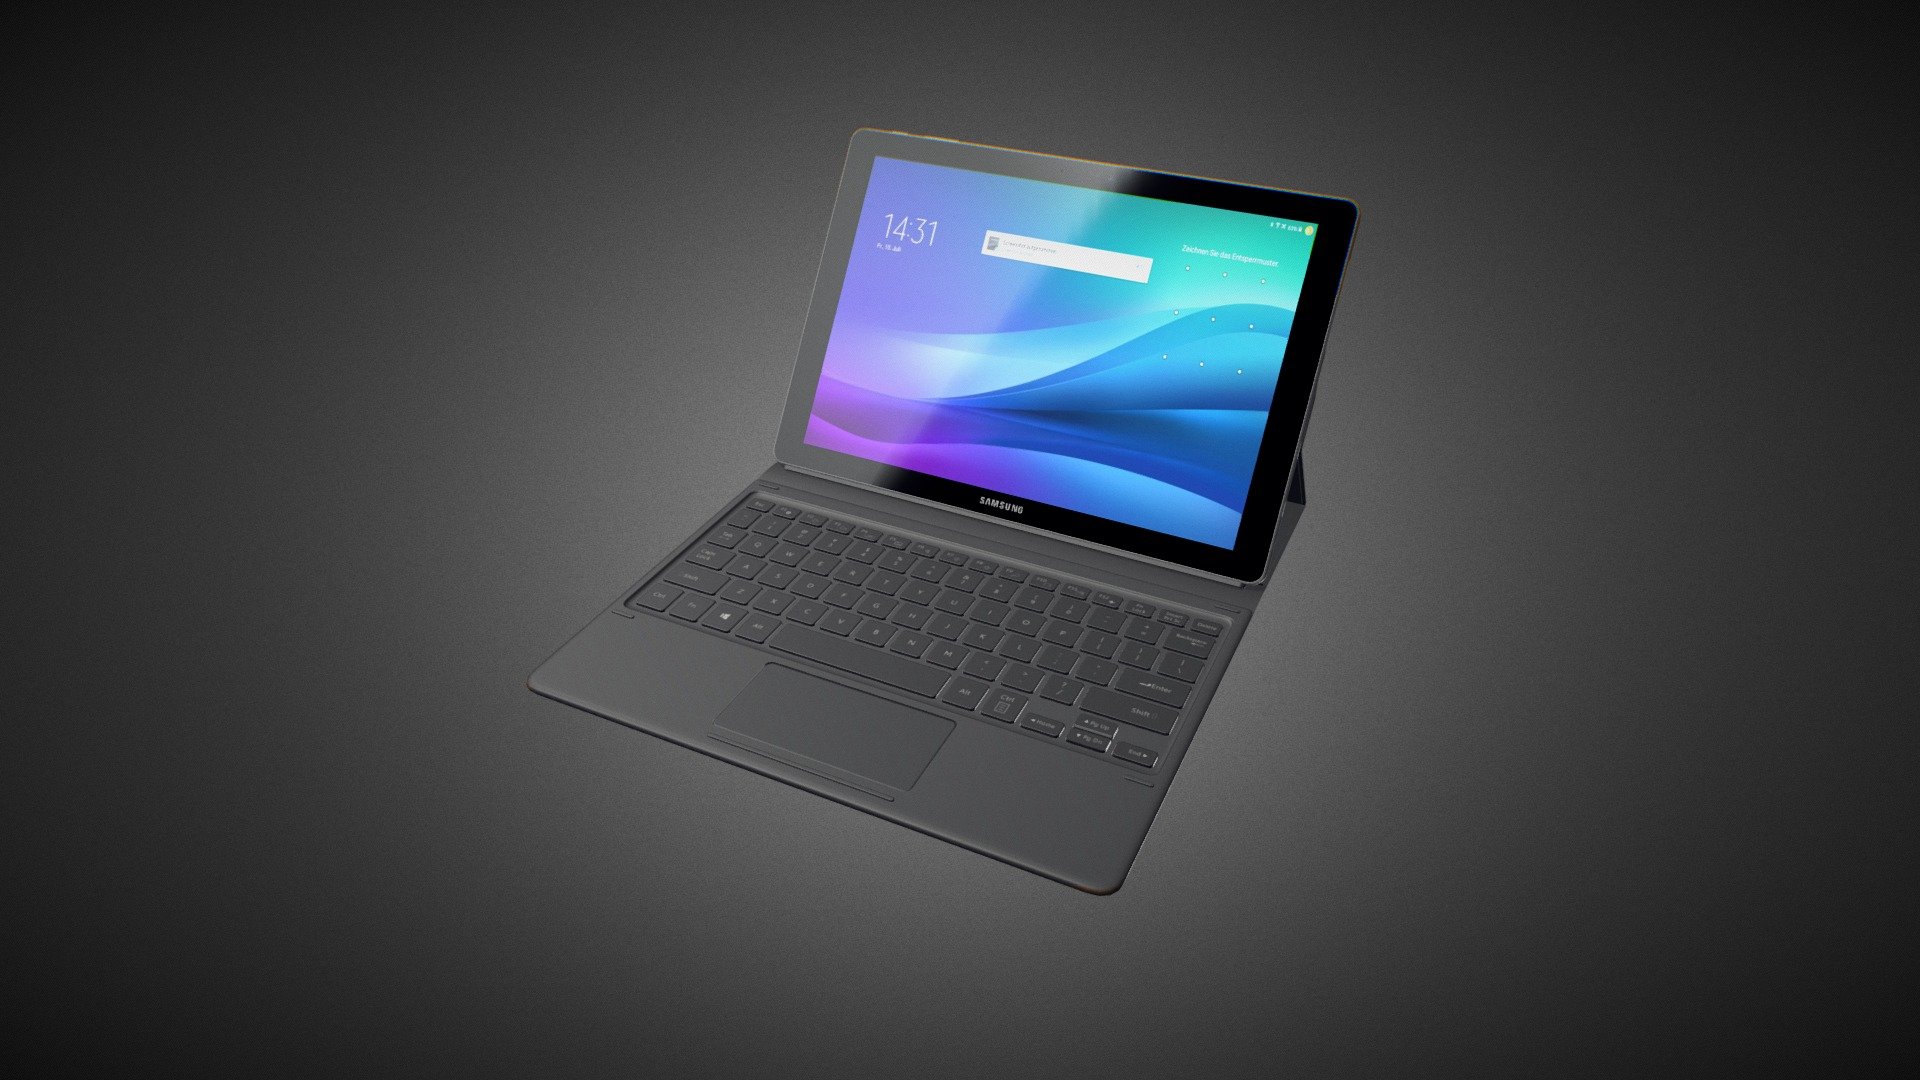 Samsung Galaxy Book 12 inch for Element 3D